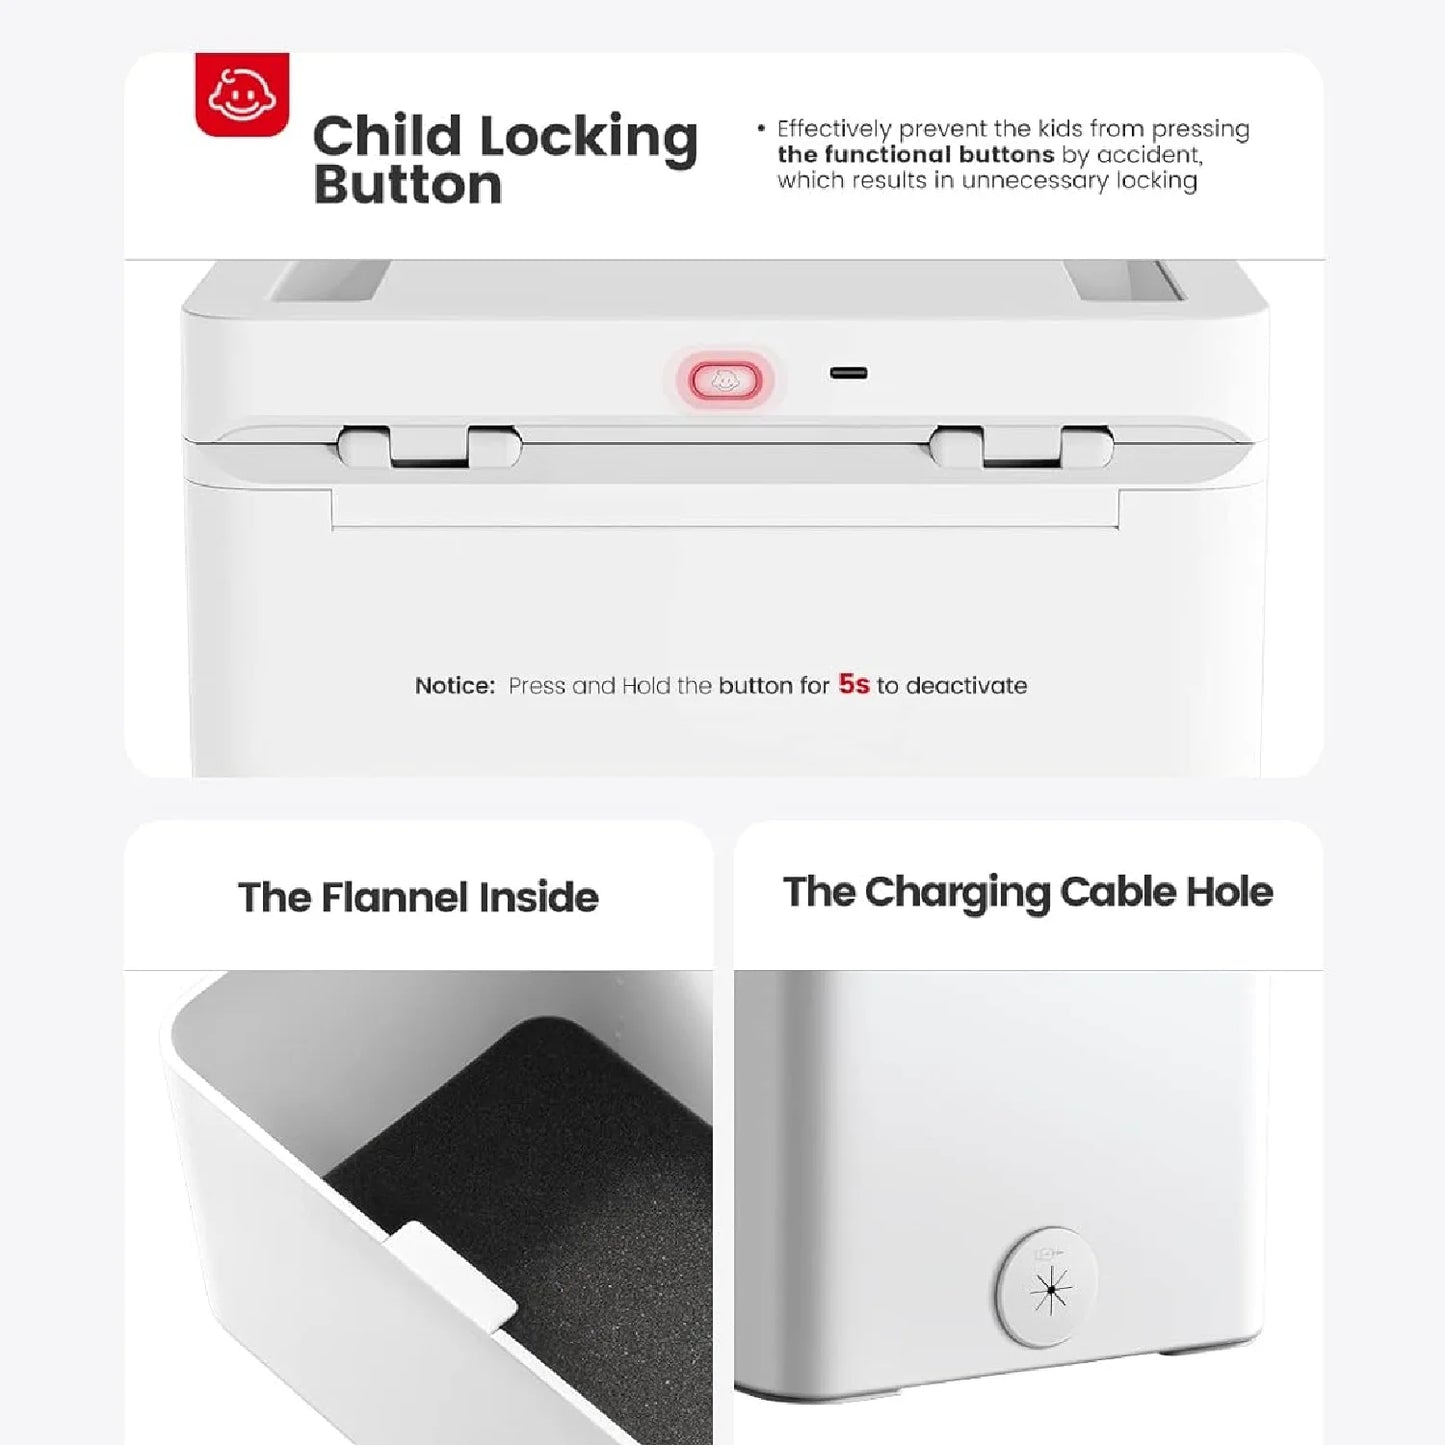 Child Lock Feature: Focus on the child lock button feature on the lock box, ensuring safety and preventing accidental or unwanted unlocking by children.